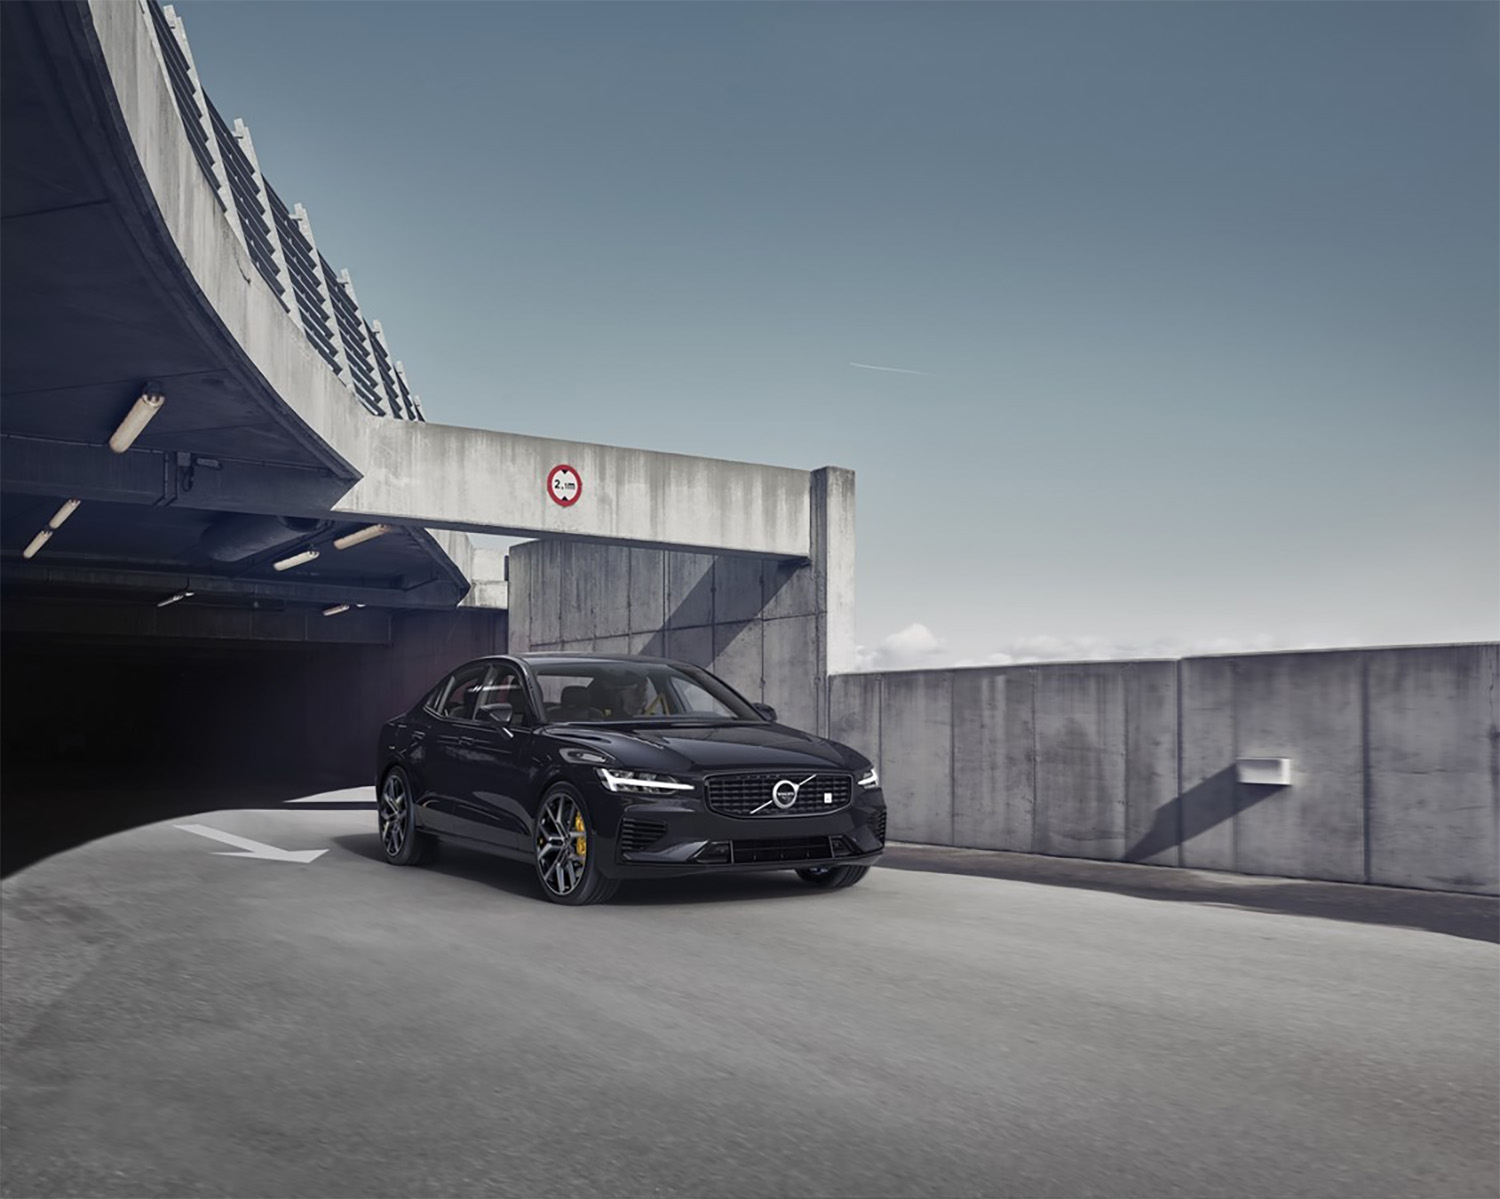 Volvo S60 Polestar Engineered Recharge in Black Stone Driving out of A tunnel